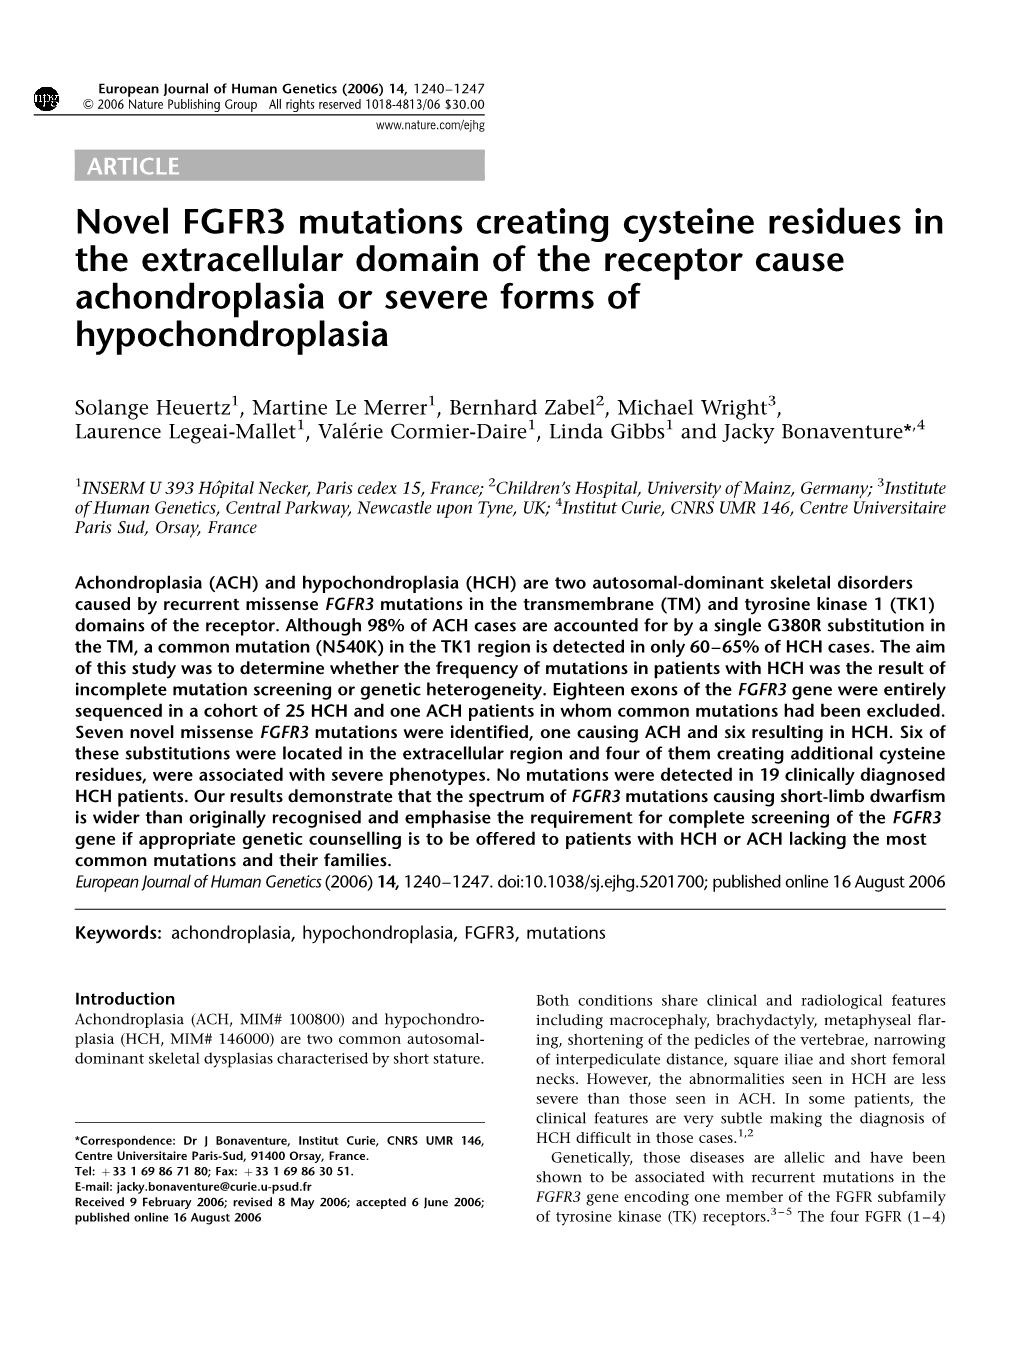 Novel FGFR3 Mutations Creating Cysteine Residues in the Extracellular Domain of the Receptor Cause Achondroplasia Or Severe Forms of Hypochondroplasia